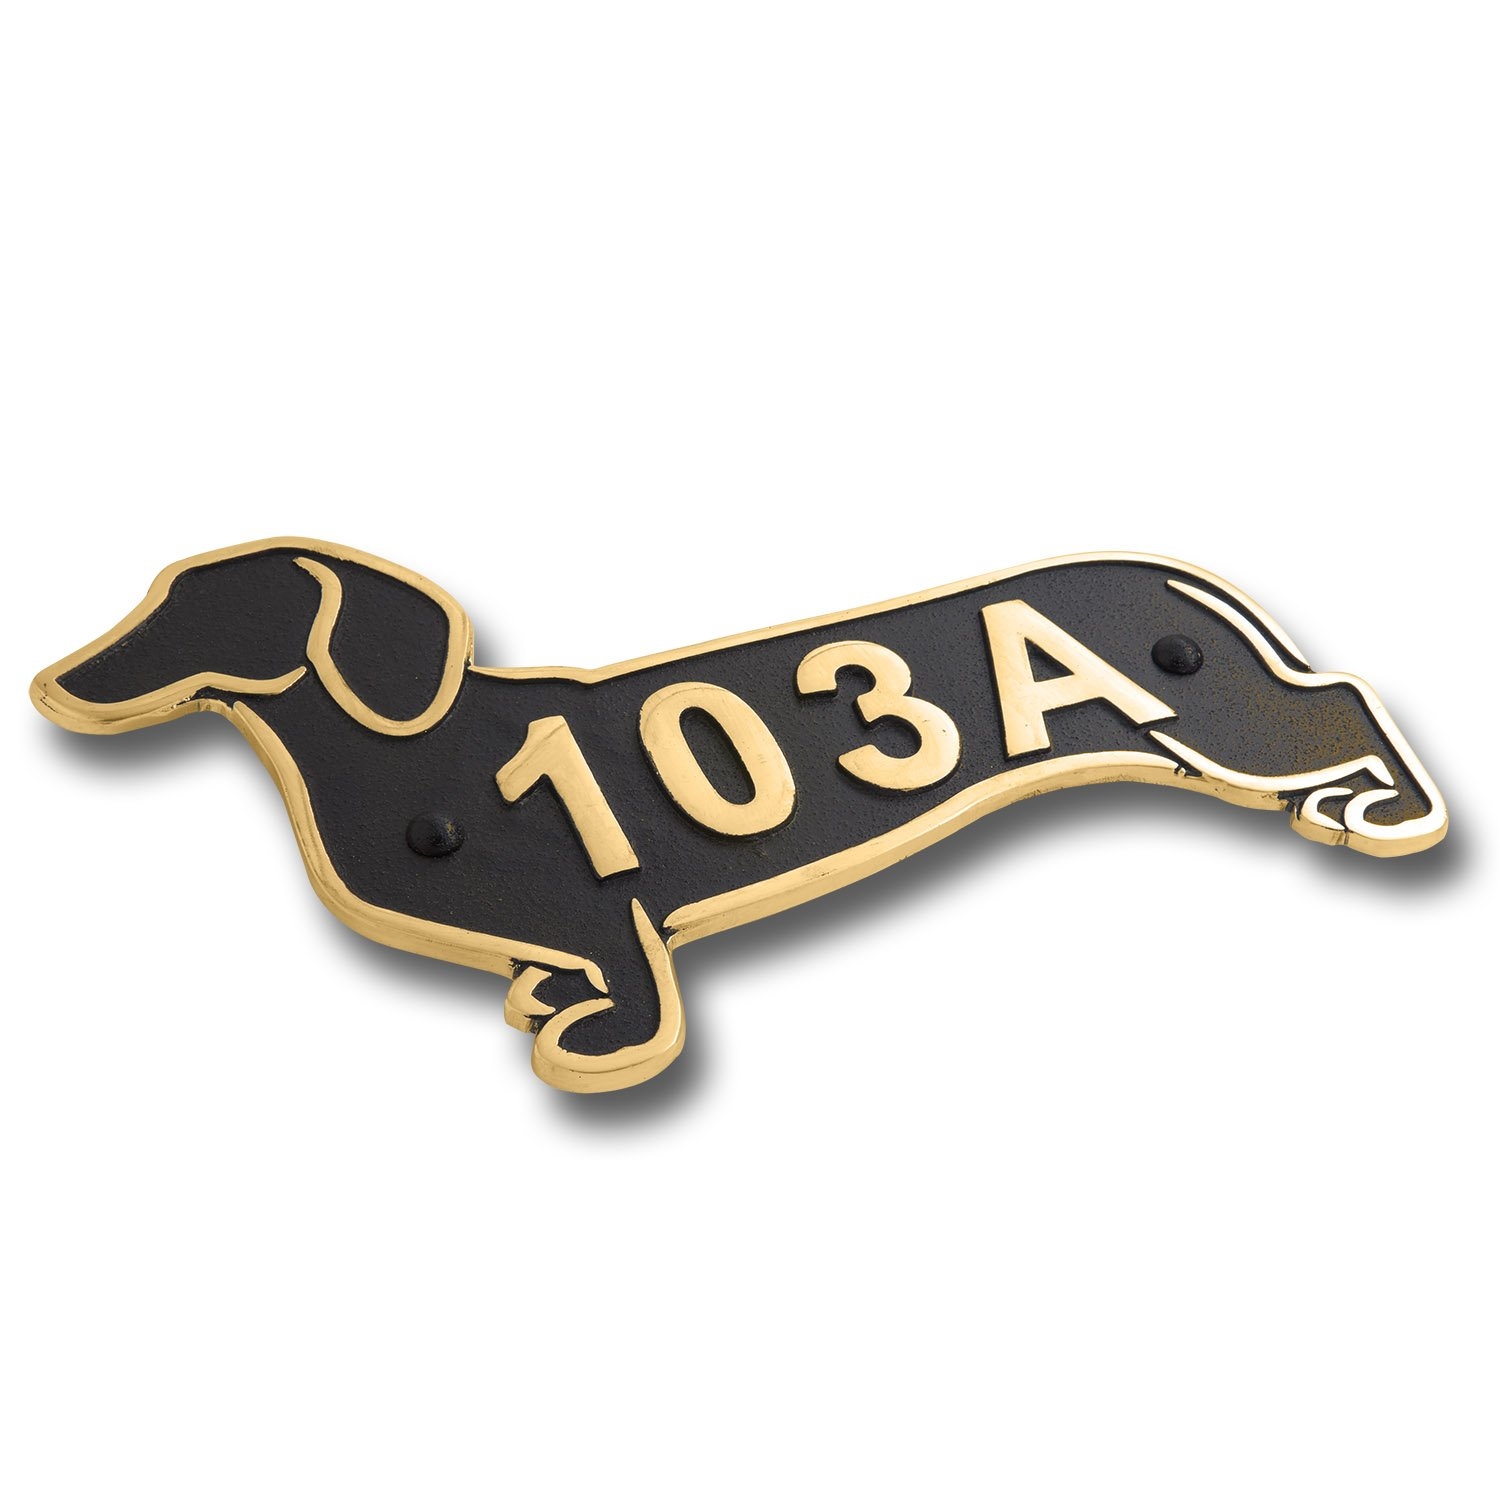 Dachshund Metal House Number Address Plaque. Sausage Dog Gift Idea For A Dachshund Owner. Yard Or Garden Dachshund Décor Makes A Great Gift For Him Or Her – Brass & Blue